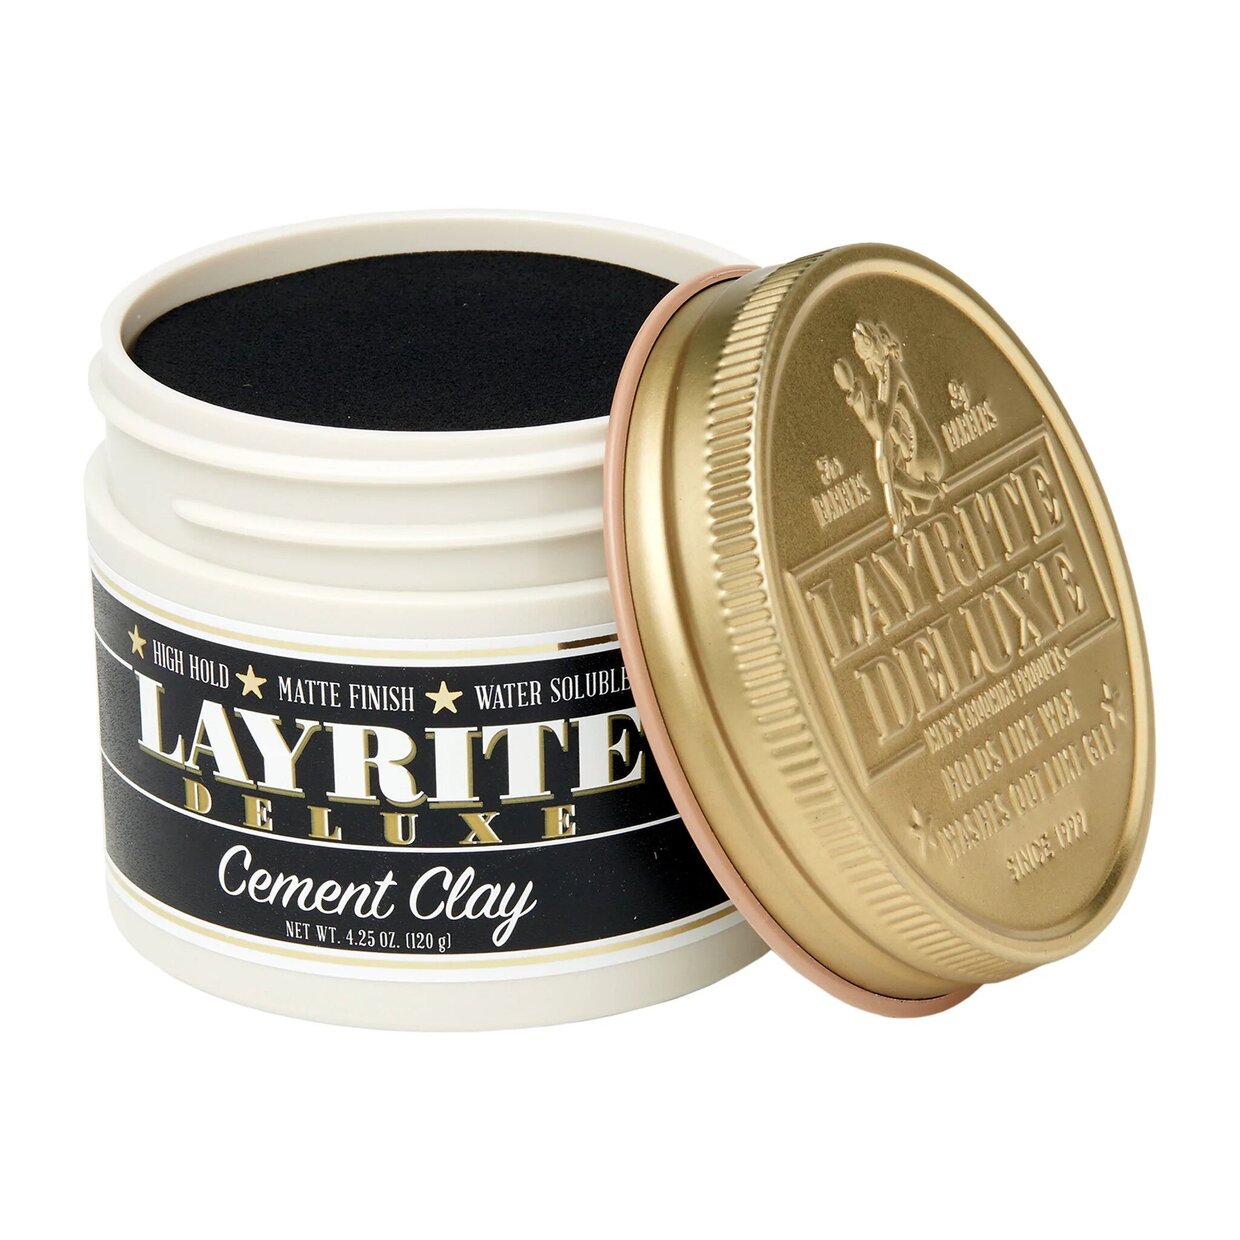 Layrite Deluxe hair pomade cement clay 120gr 